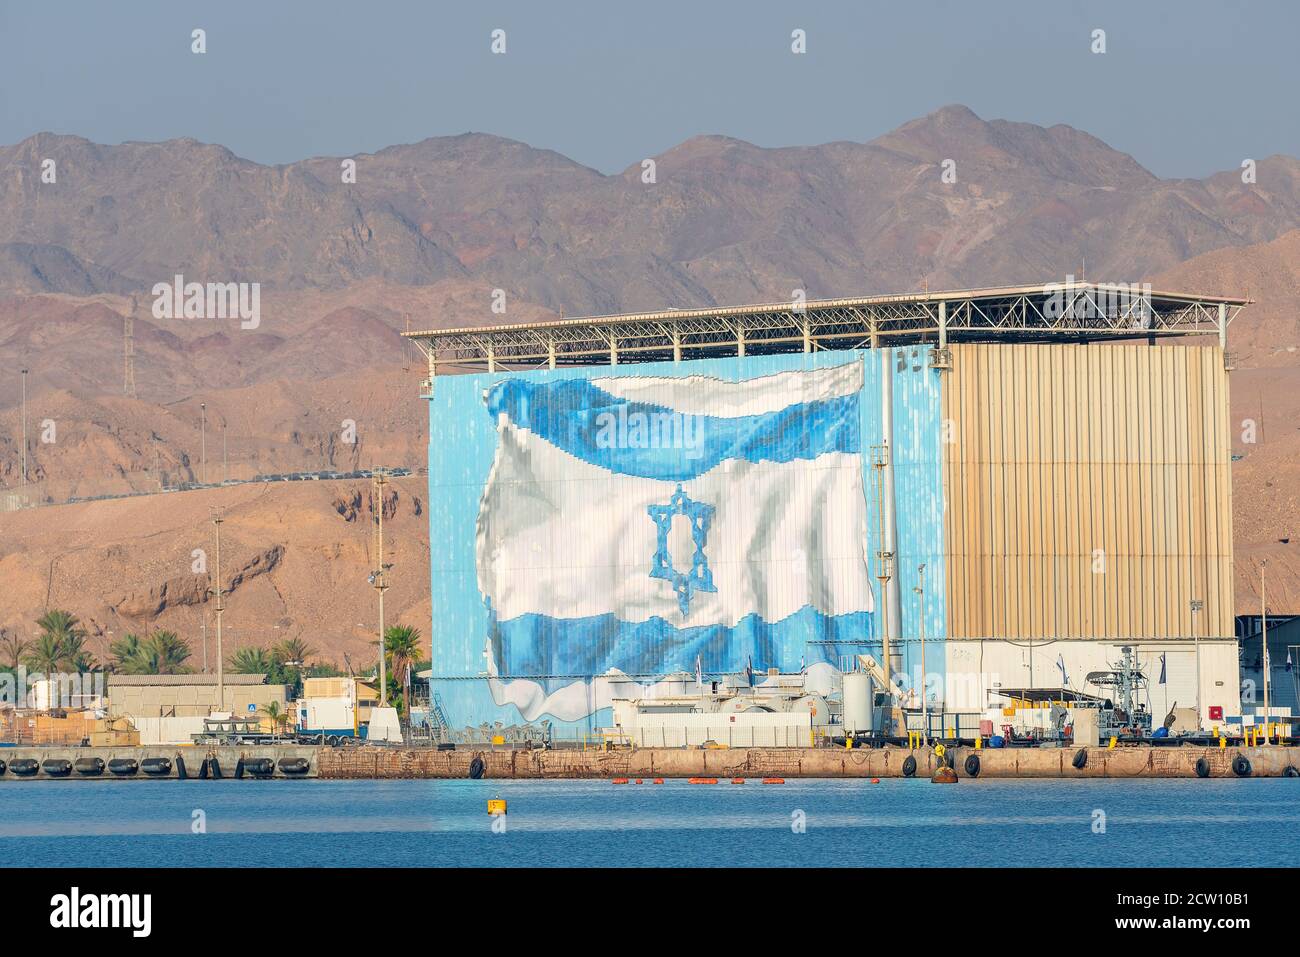 Eilat, Israel - A very large israeli flag on a building in the bay of Eilat, Israel. Stock Photo